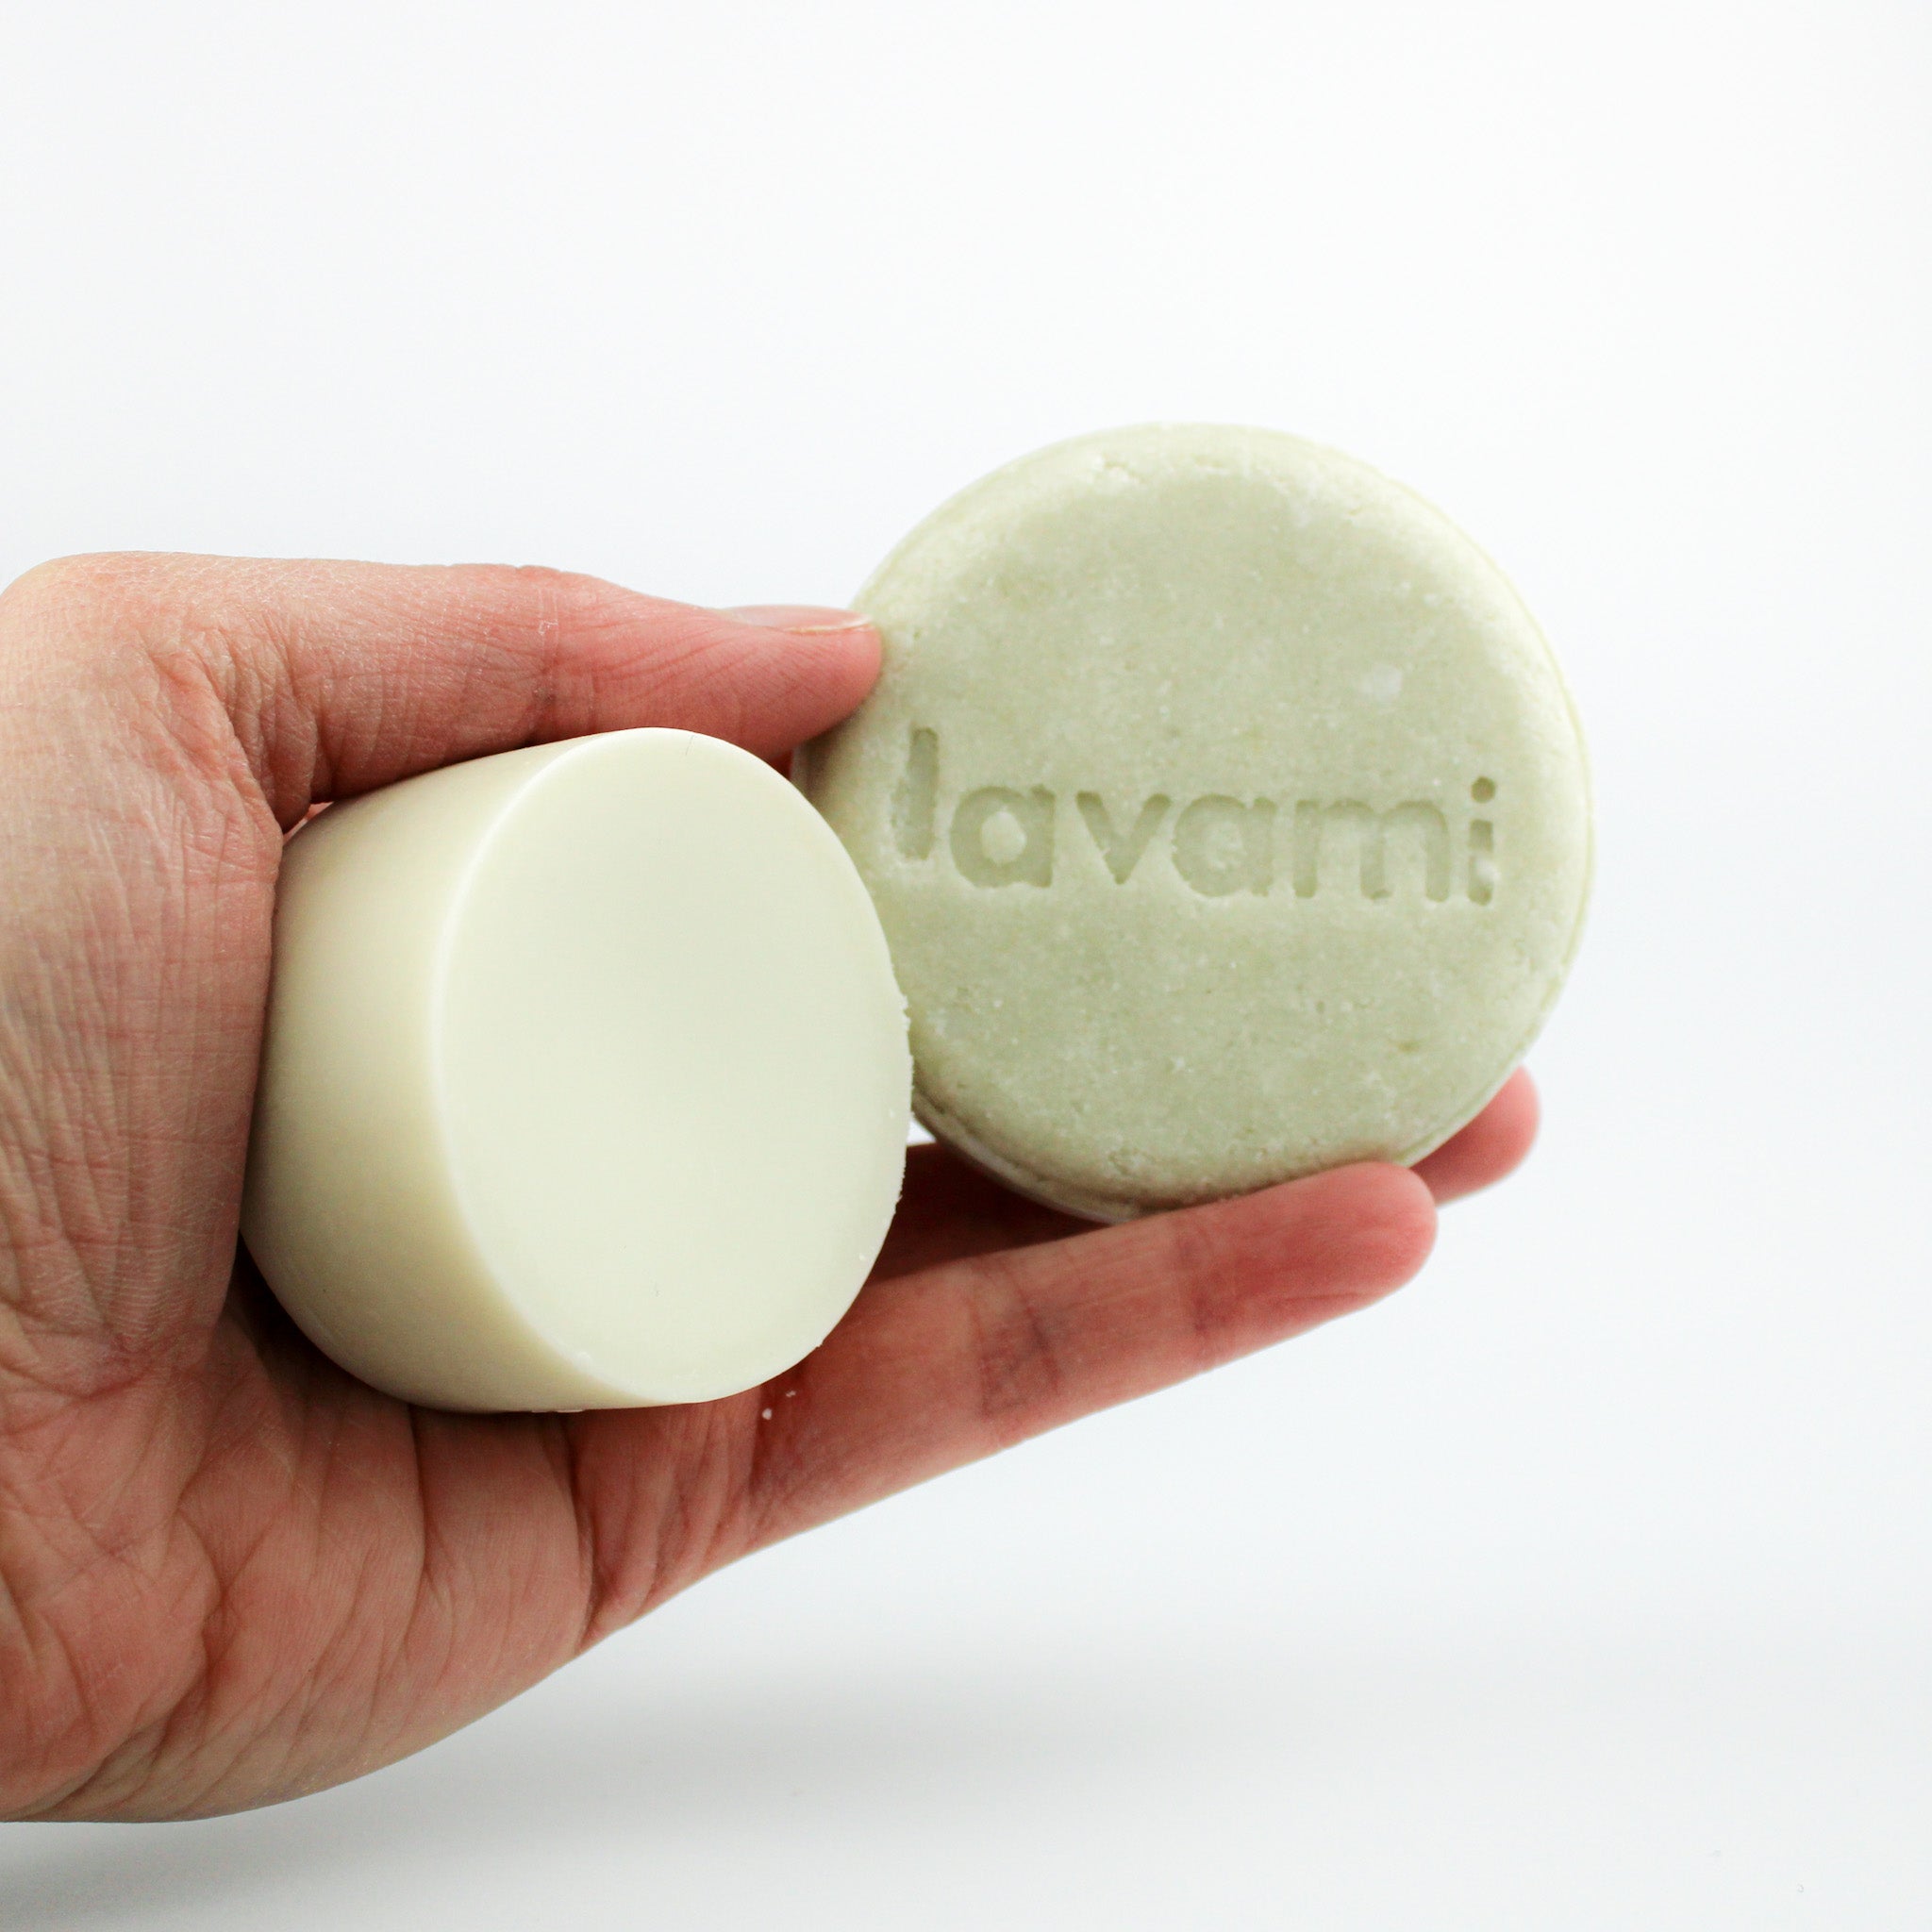 Shampoo and Conditioner Bar Set - Gentle and Perfect for Dry and Sensitive Scalps